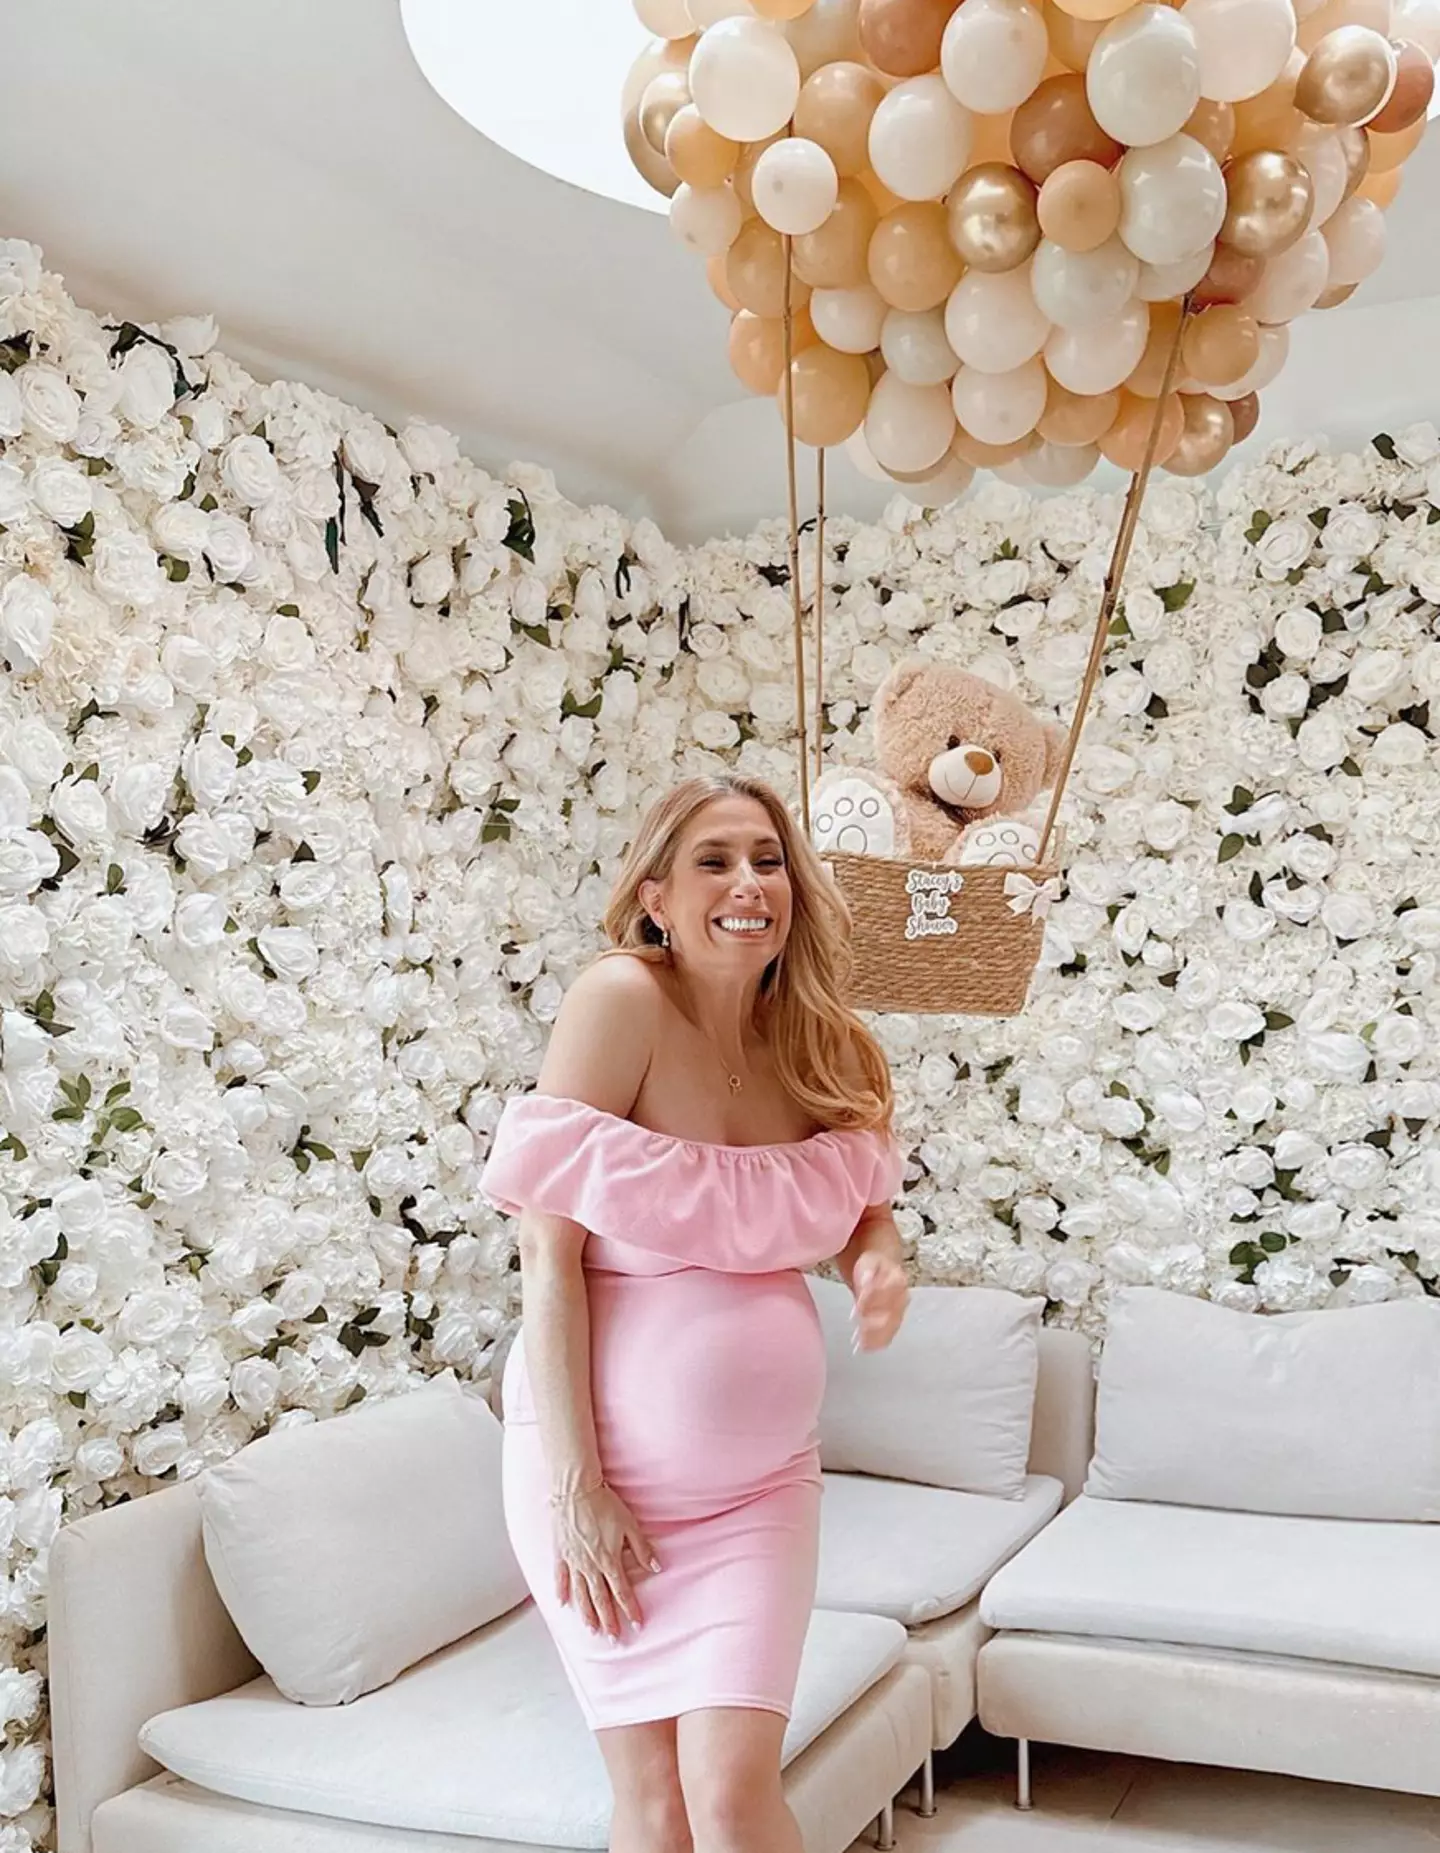 Stacey threw a lavish baby shower, hinting at the name.